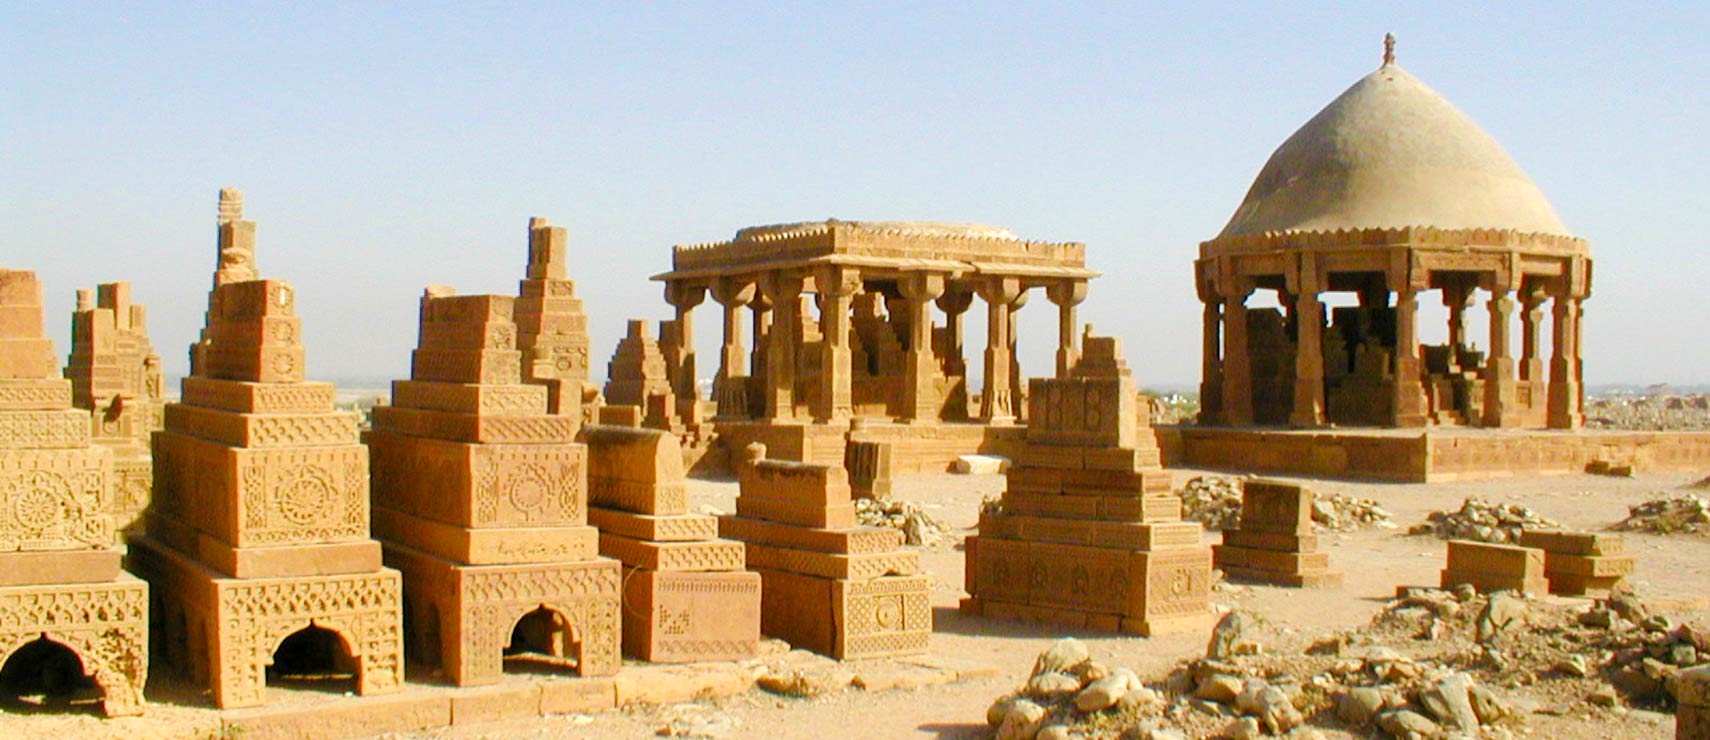 Chaukhandi tombs in Sindh province, Pakistan